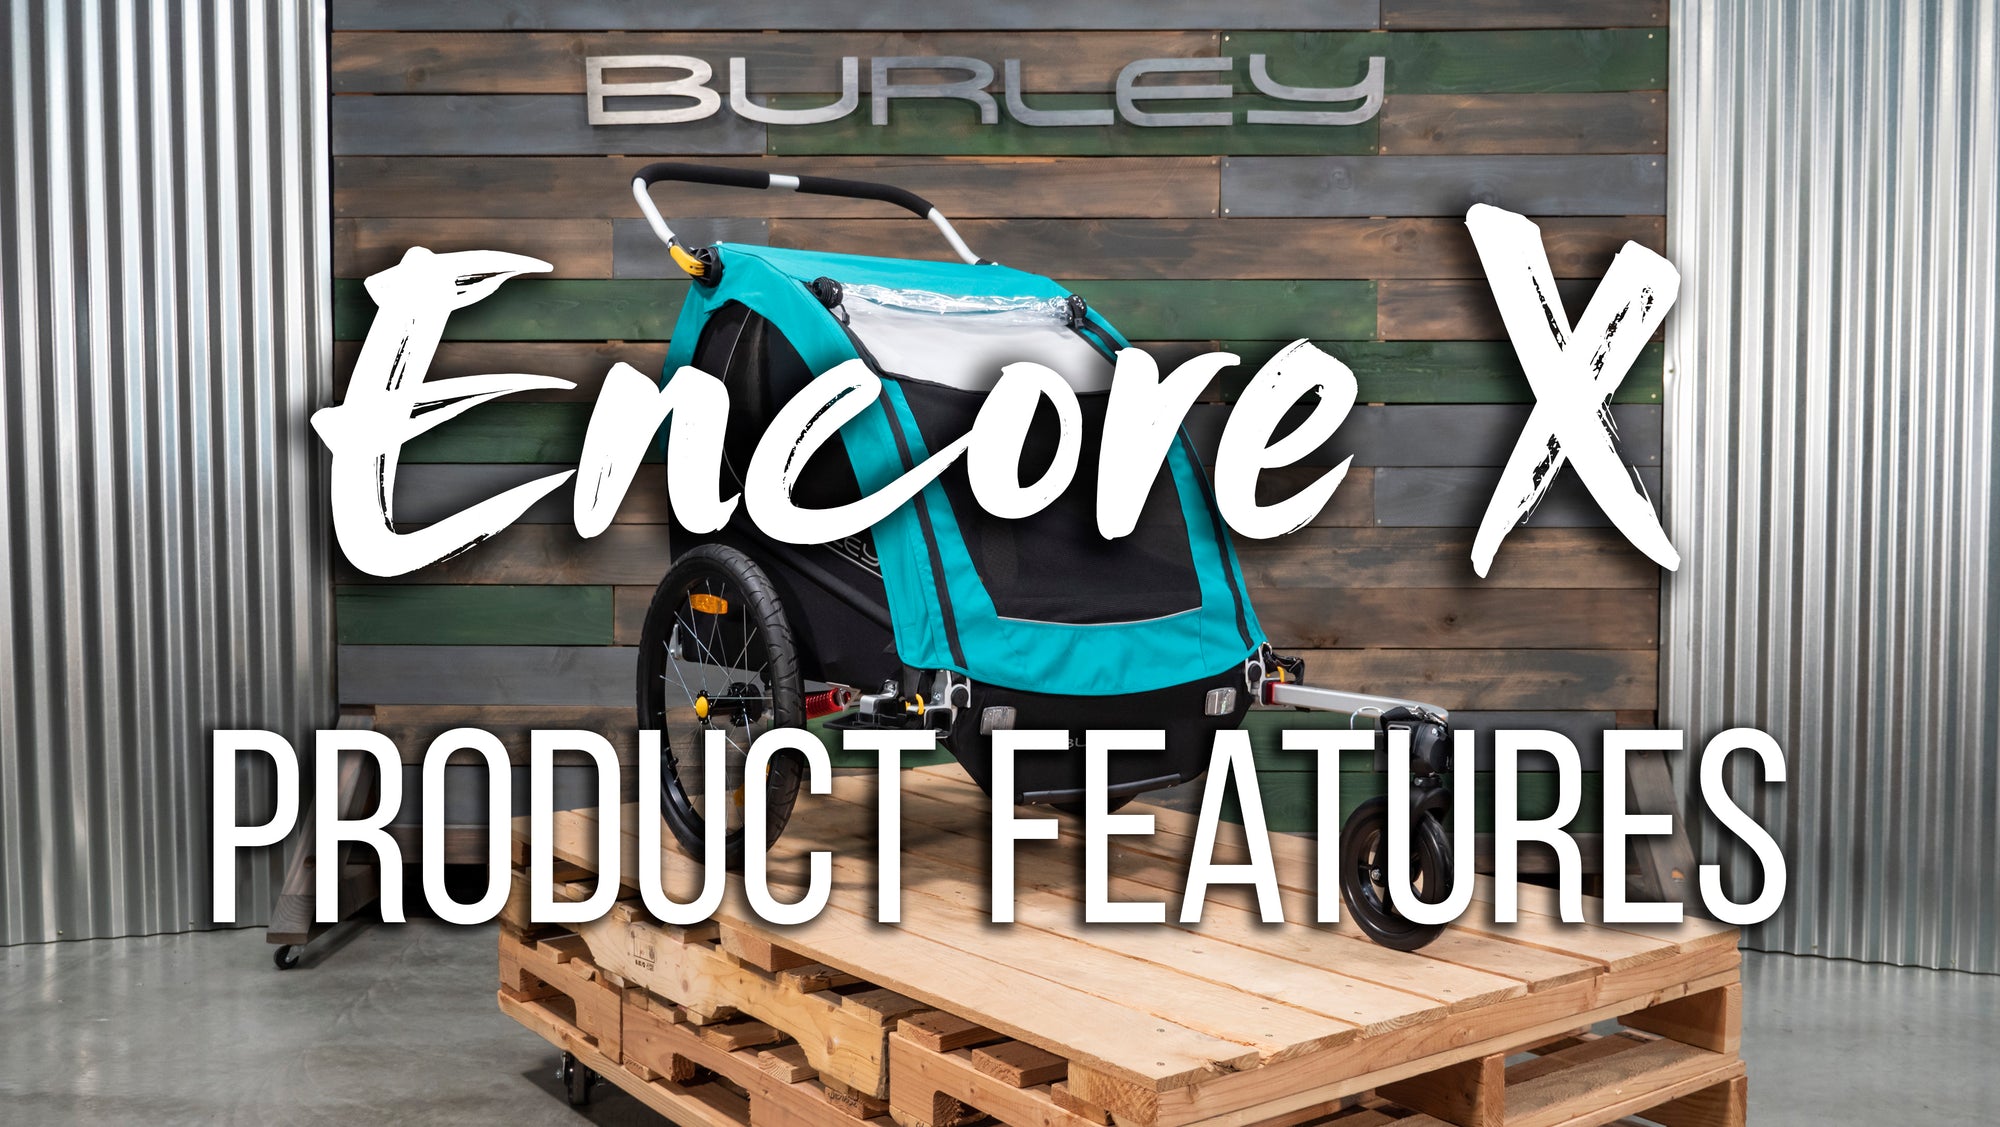 Encore X Product Features